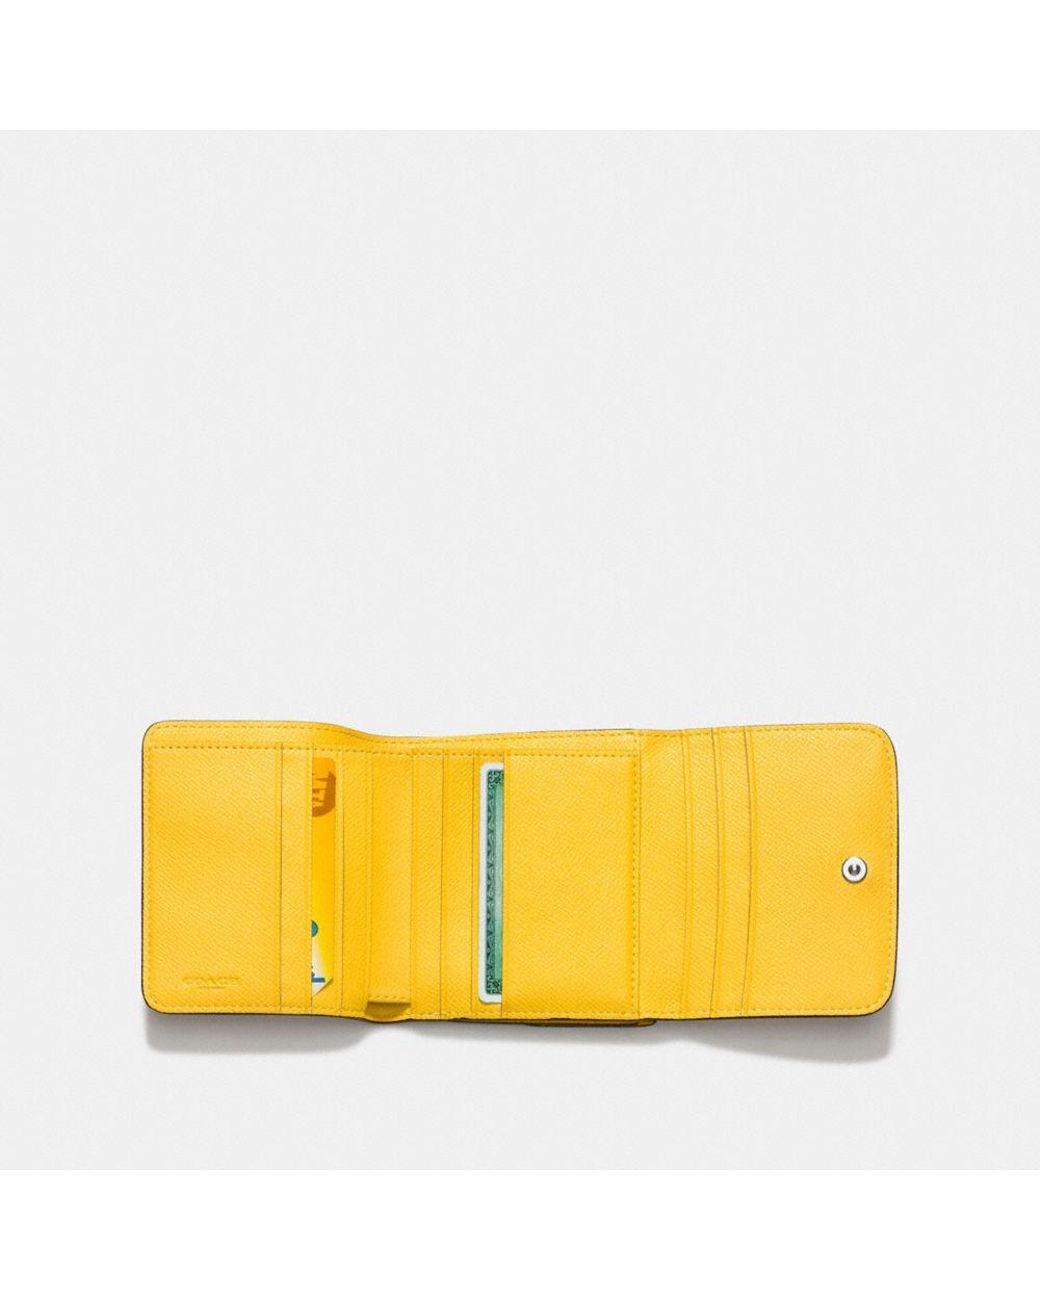 Coach Zoe Yellow Leather Silver Buckle Credit Card Zip-around Long Wallet